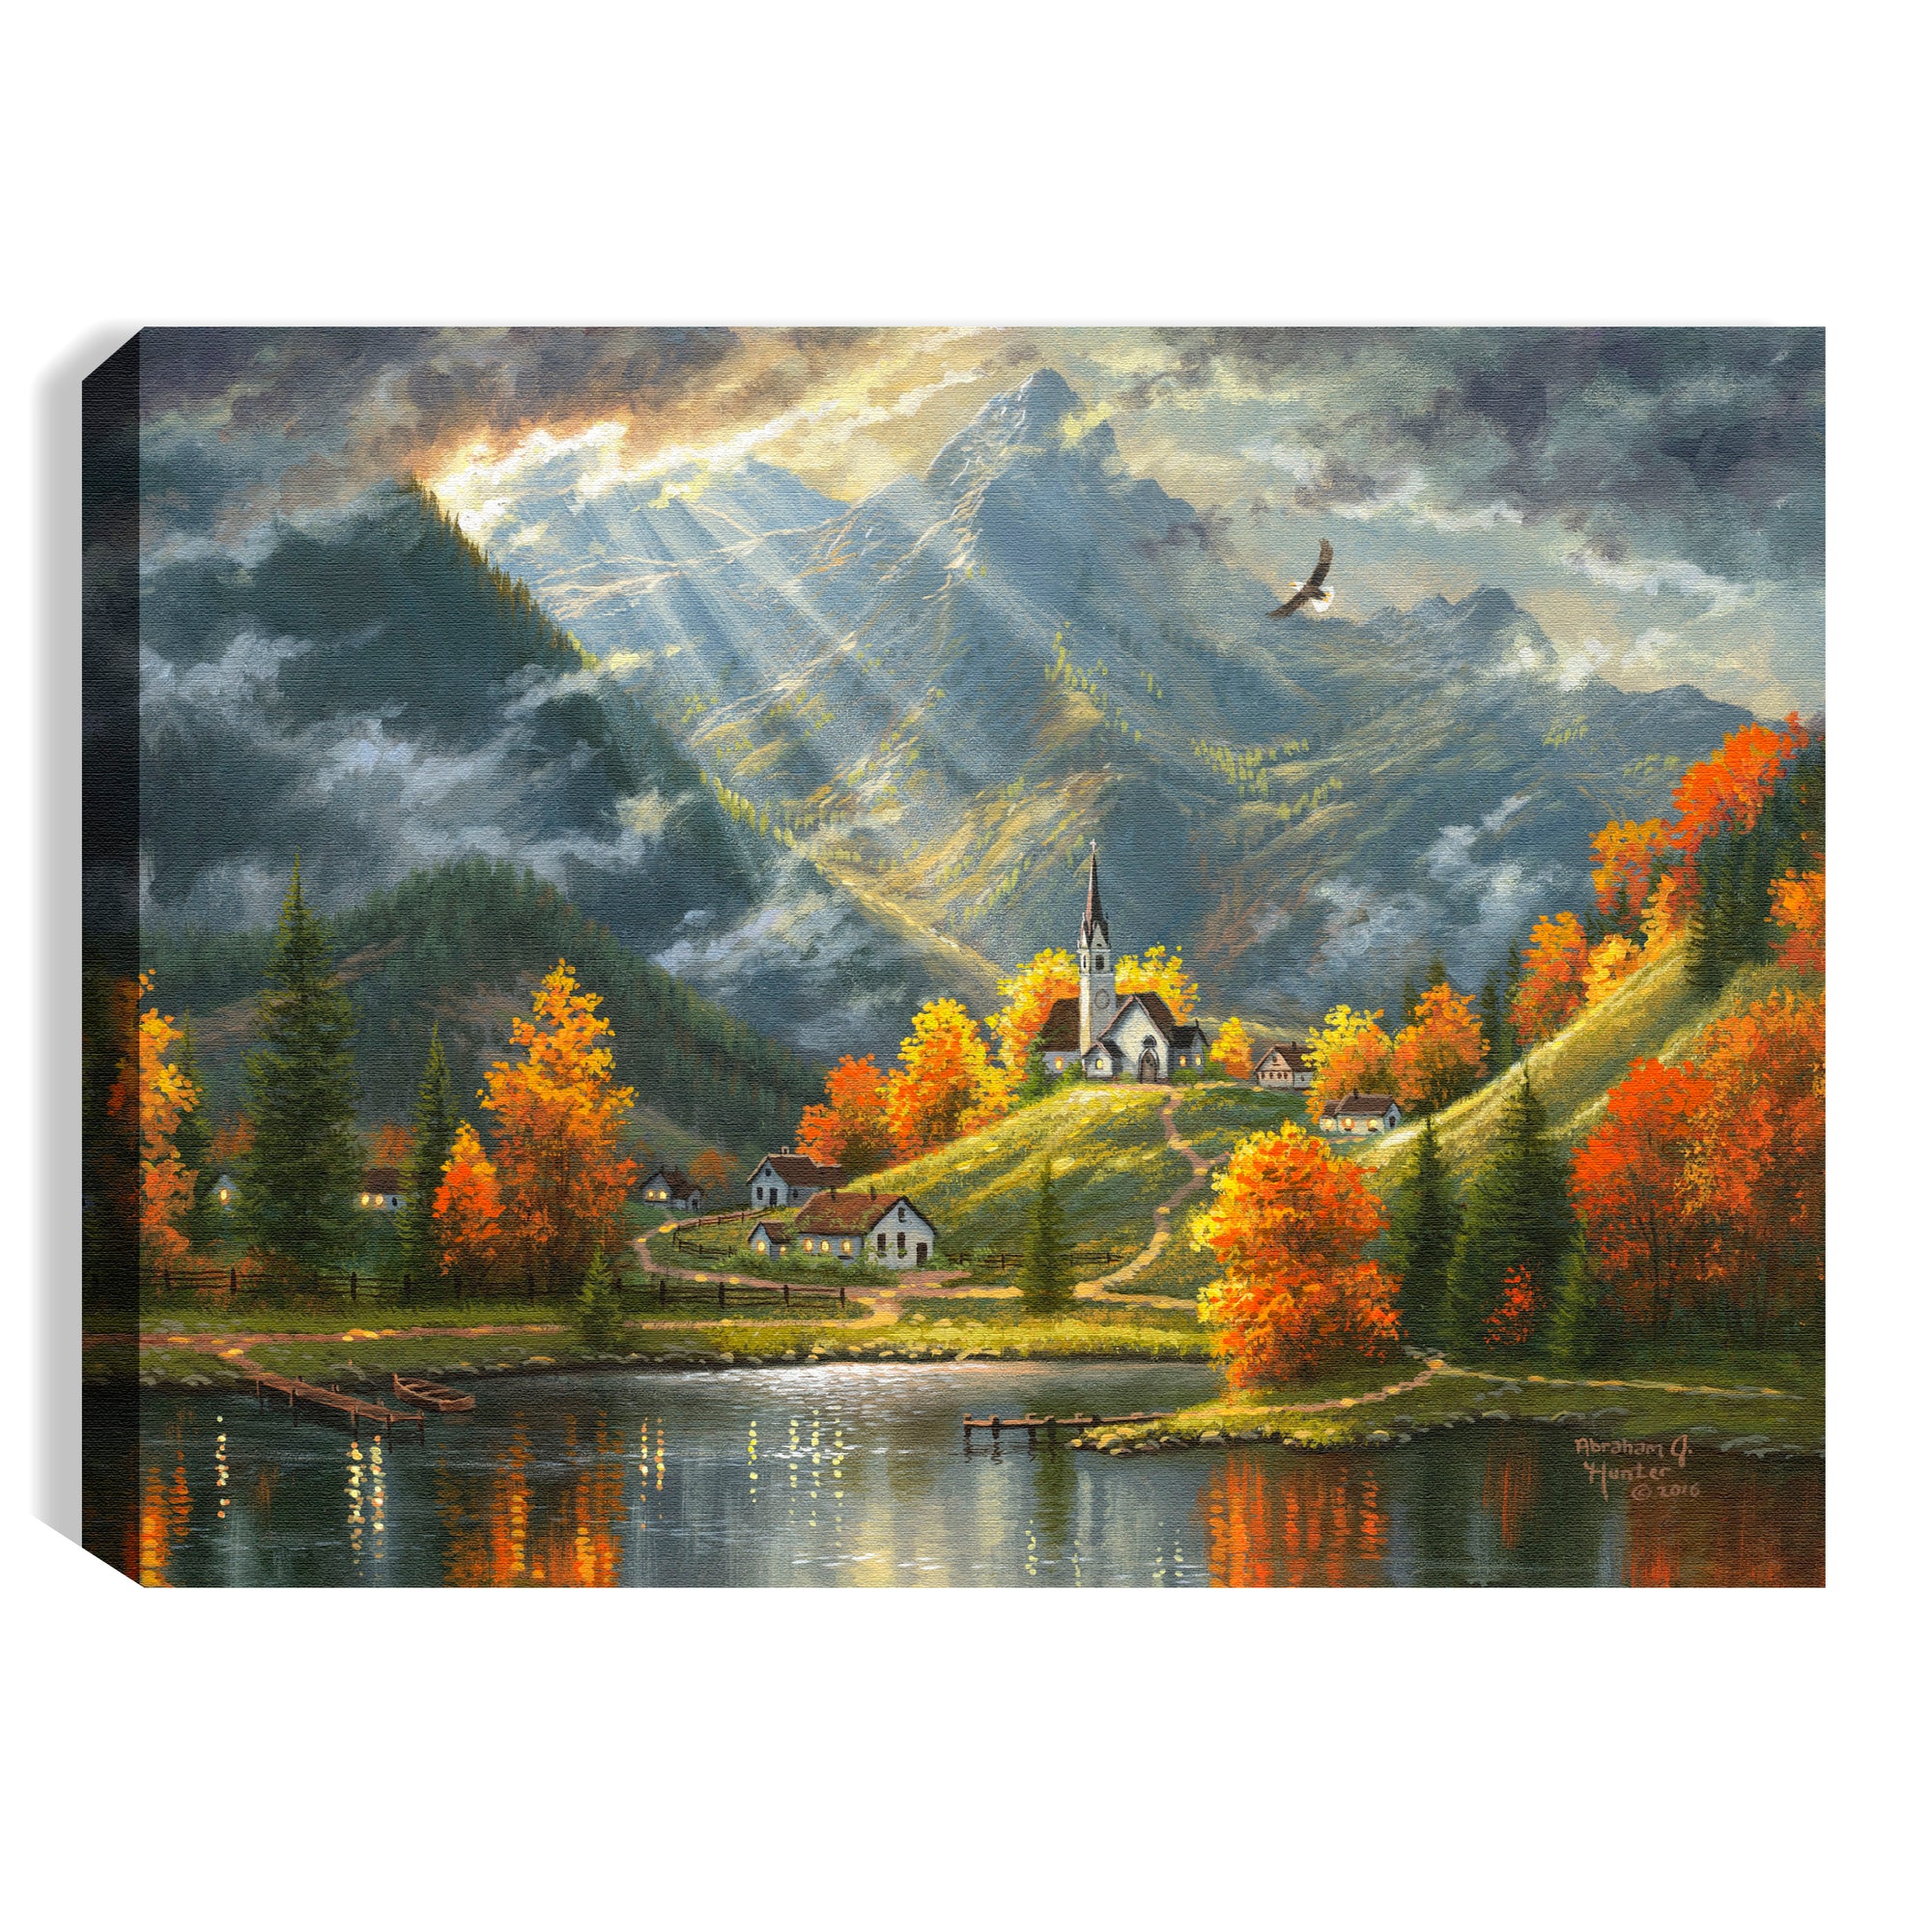 In Spirit in Truth 8x6 Lighted Tabletop Canvas